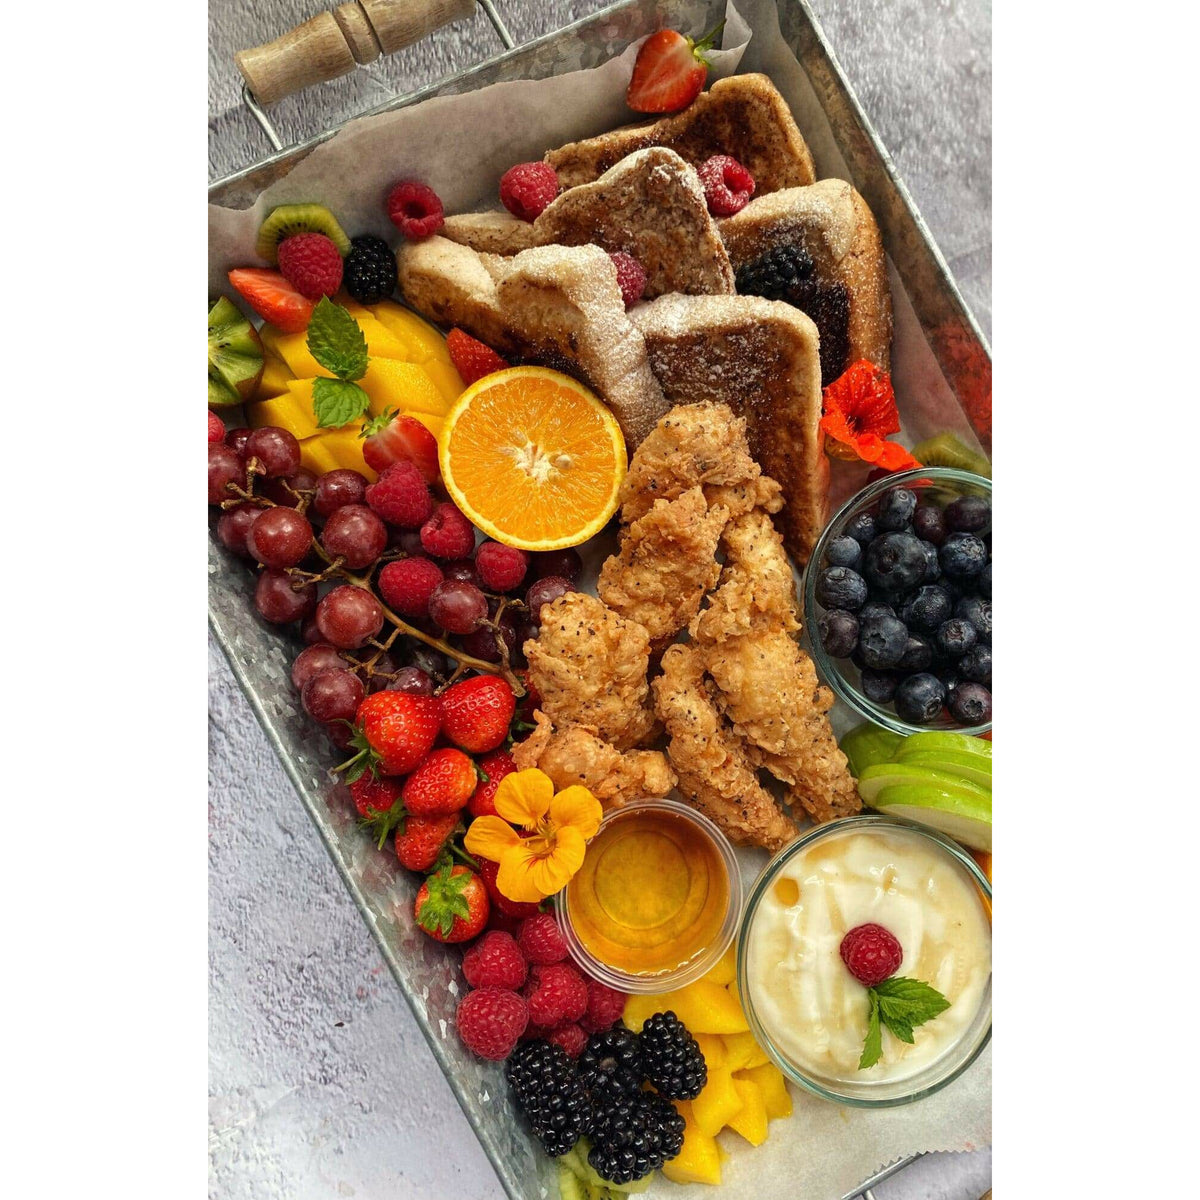 Small Breakfast Platter (Pick up and Local Delivery)